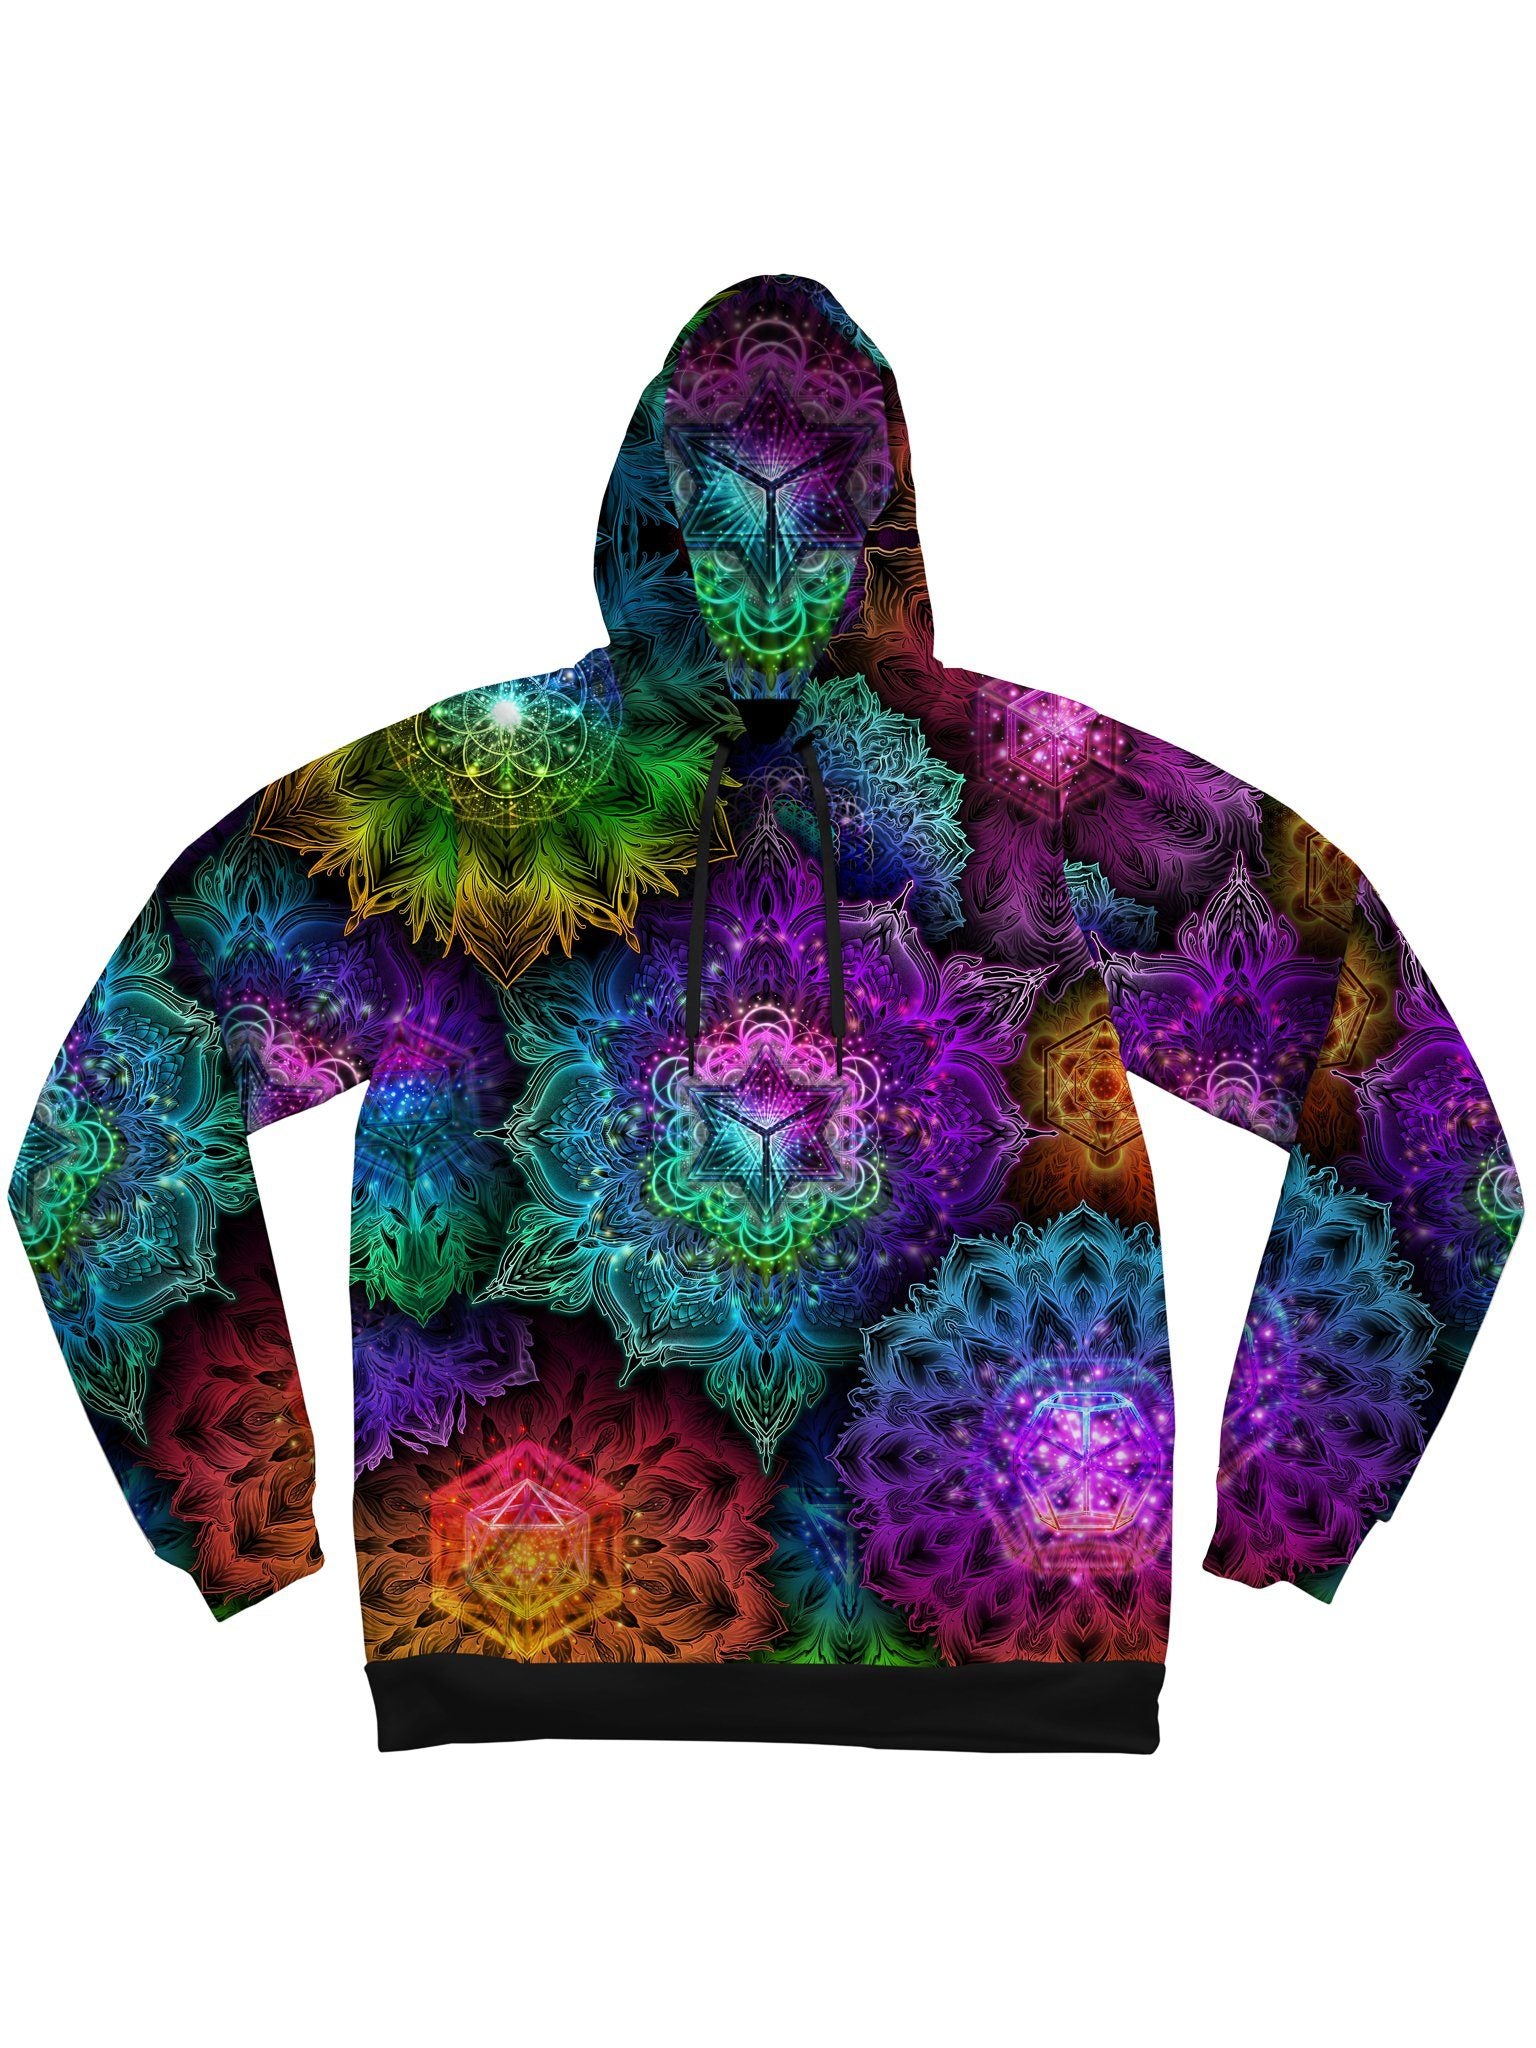 Oneness Unisex Hoodie Pullover Hoodies Electro Threads 